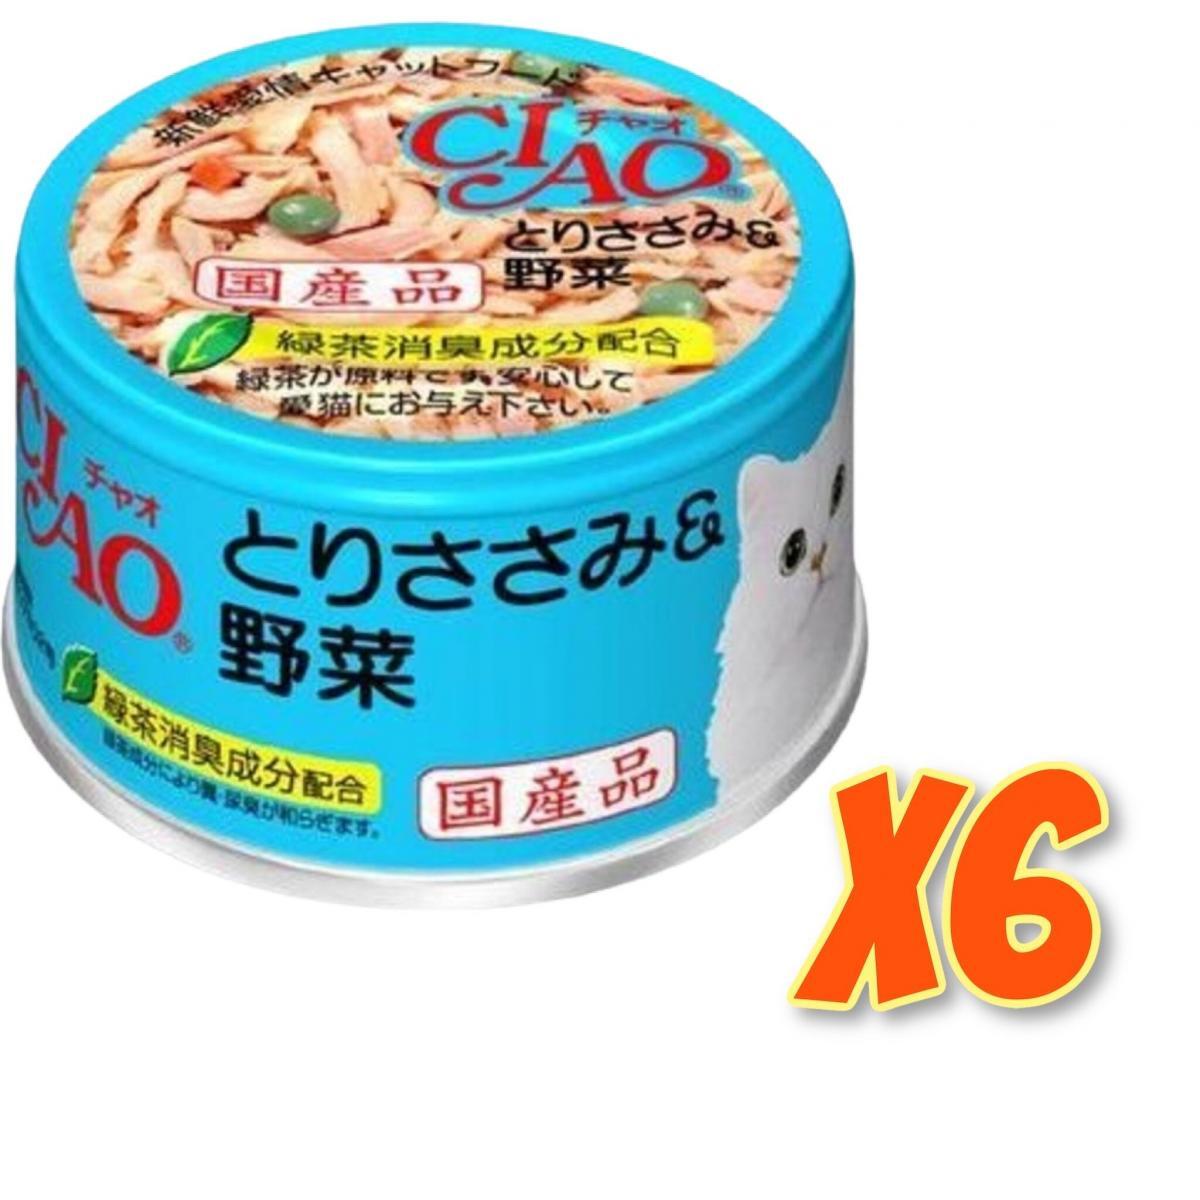 CIAO Chicken with Vegetable (85gx6) Cat Can C11x6 最佳食用日期:4/2024